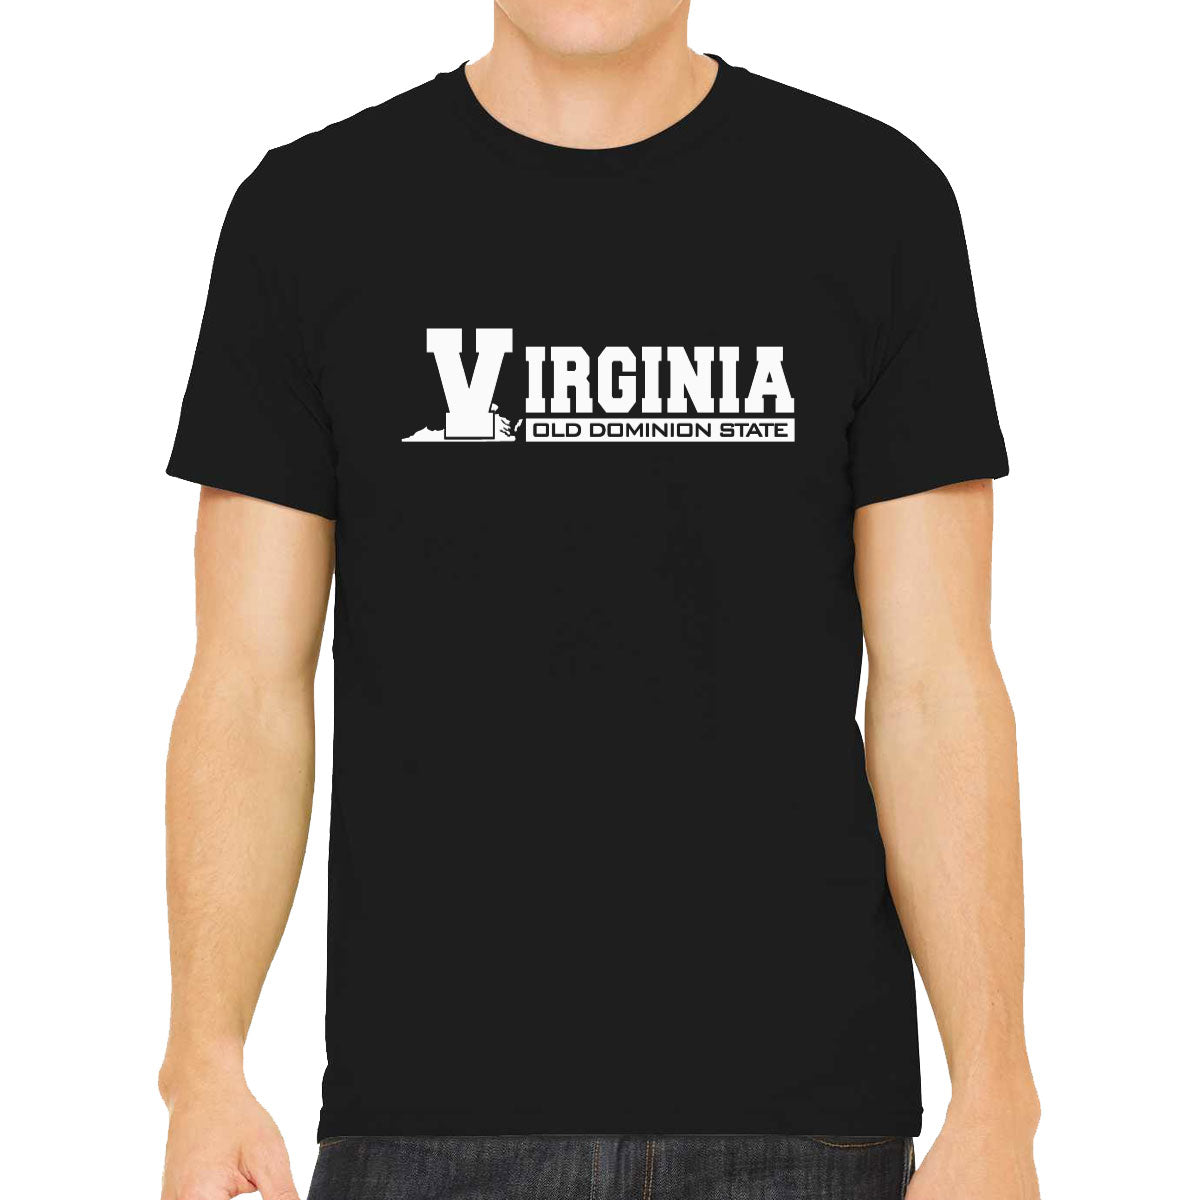 Virginia Old Dominion State Men's T-shirt